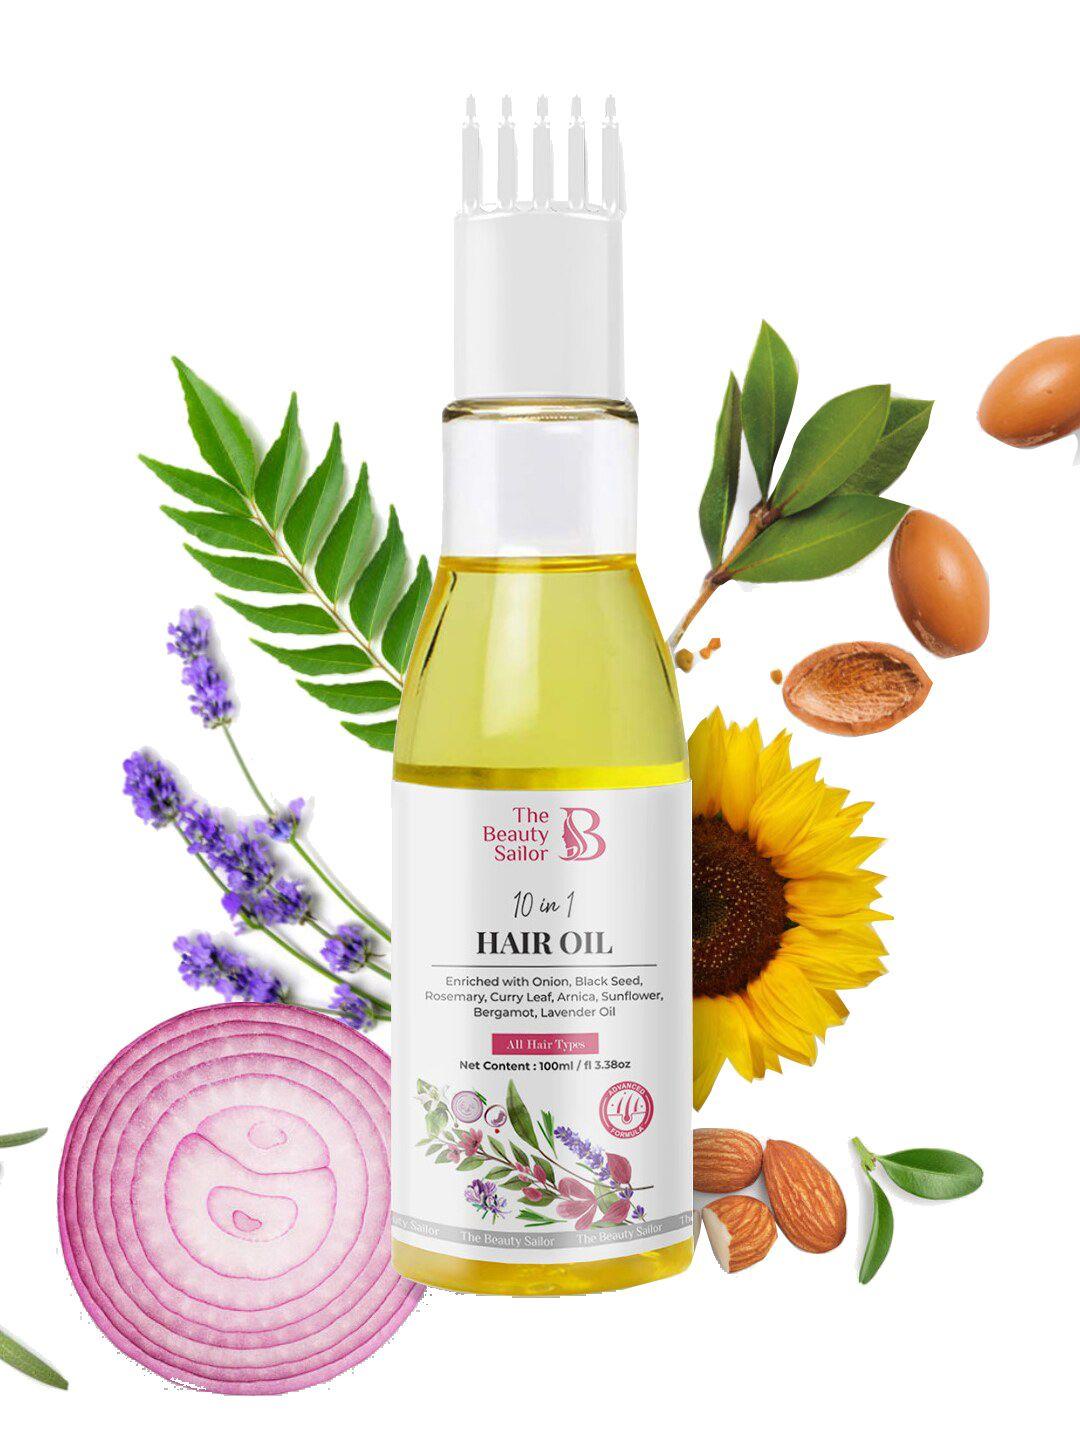 the beauty sailor 10 in 1 hair oil with onion black seed & lavender oil extracts - 100ml